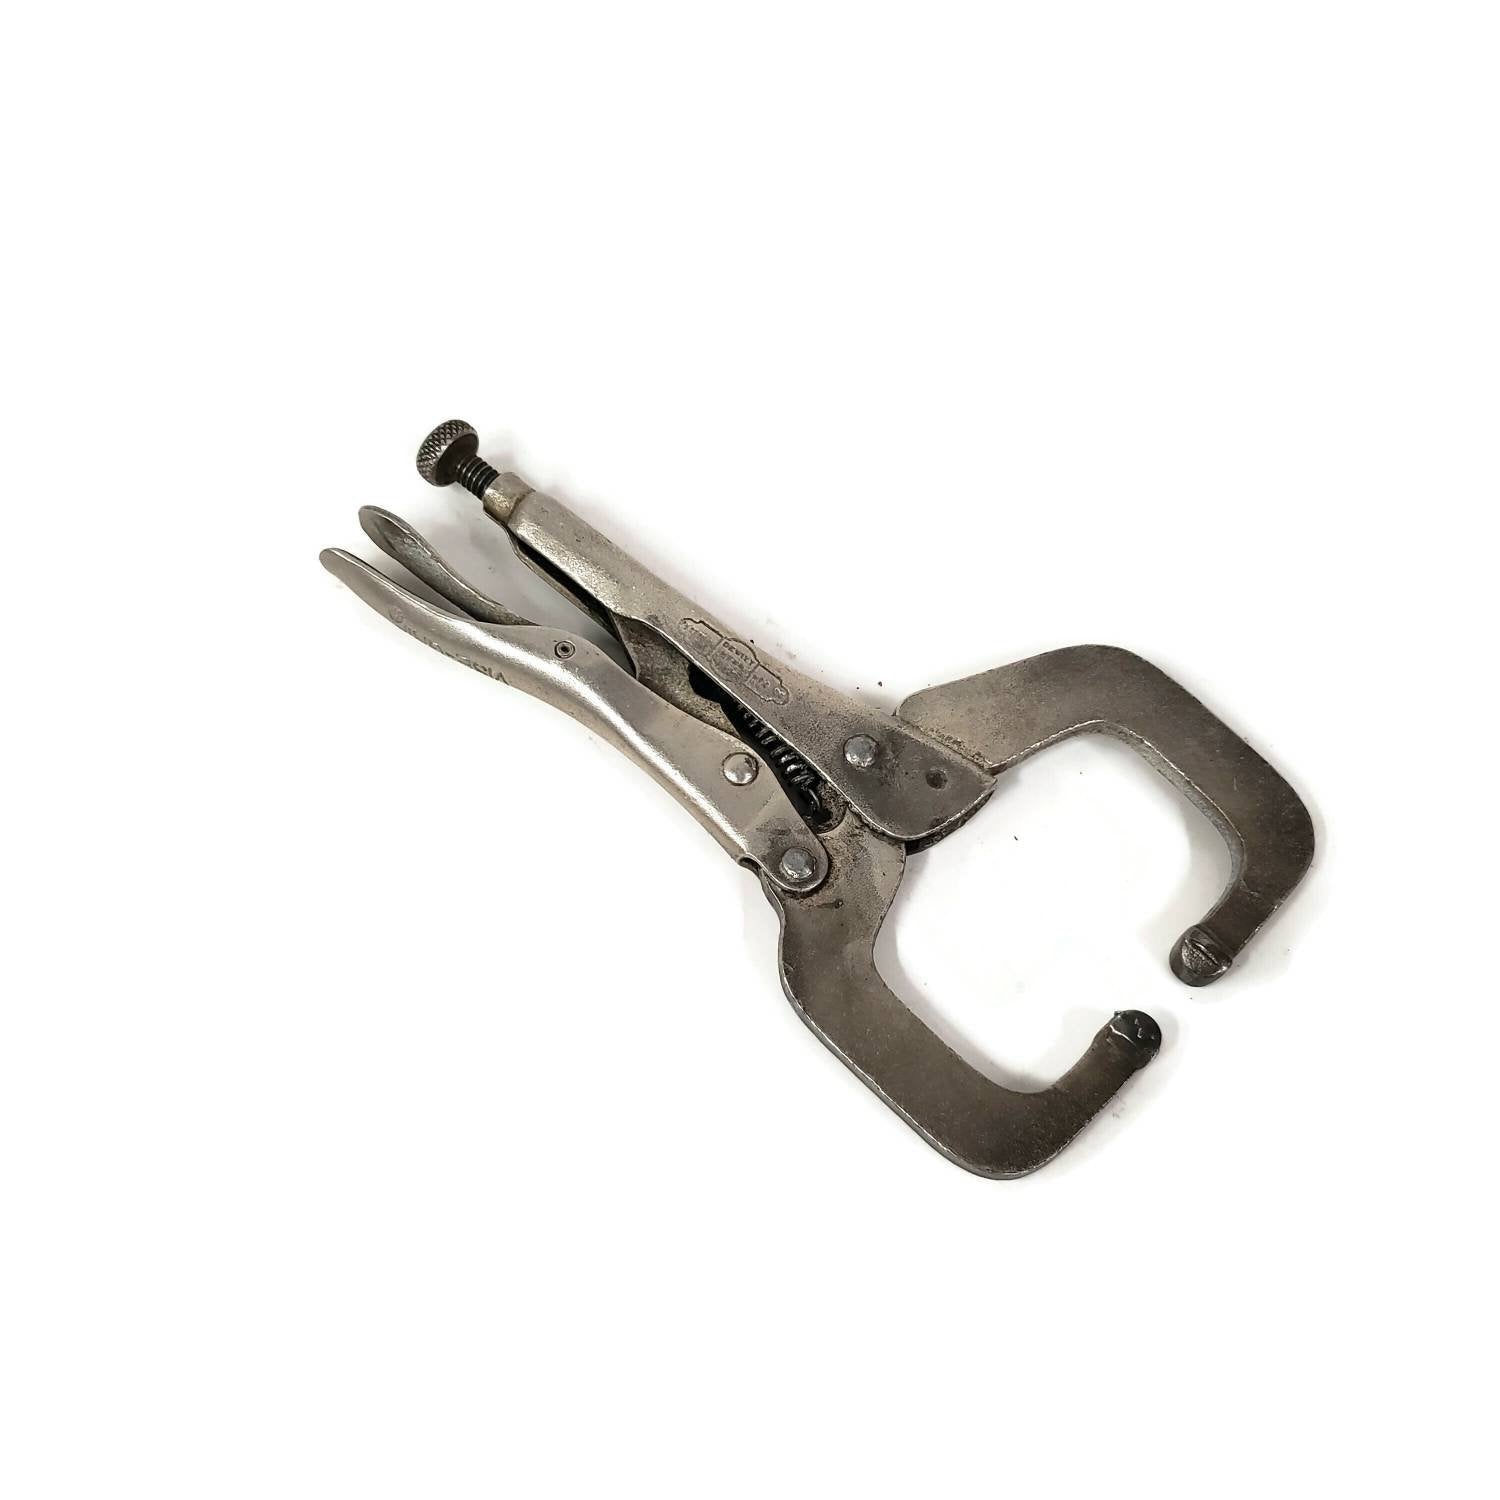 vise-grip welding clamp pliers  long arm locking jaw hand tools pliers